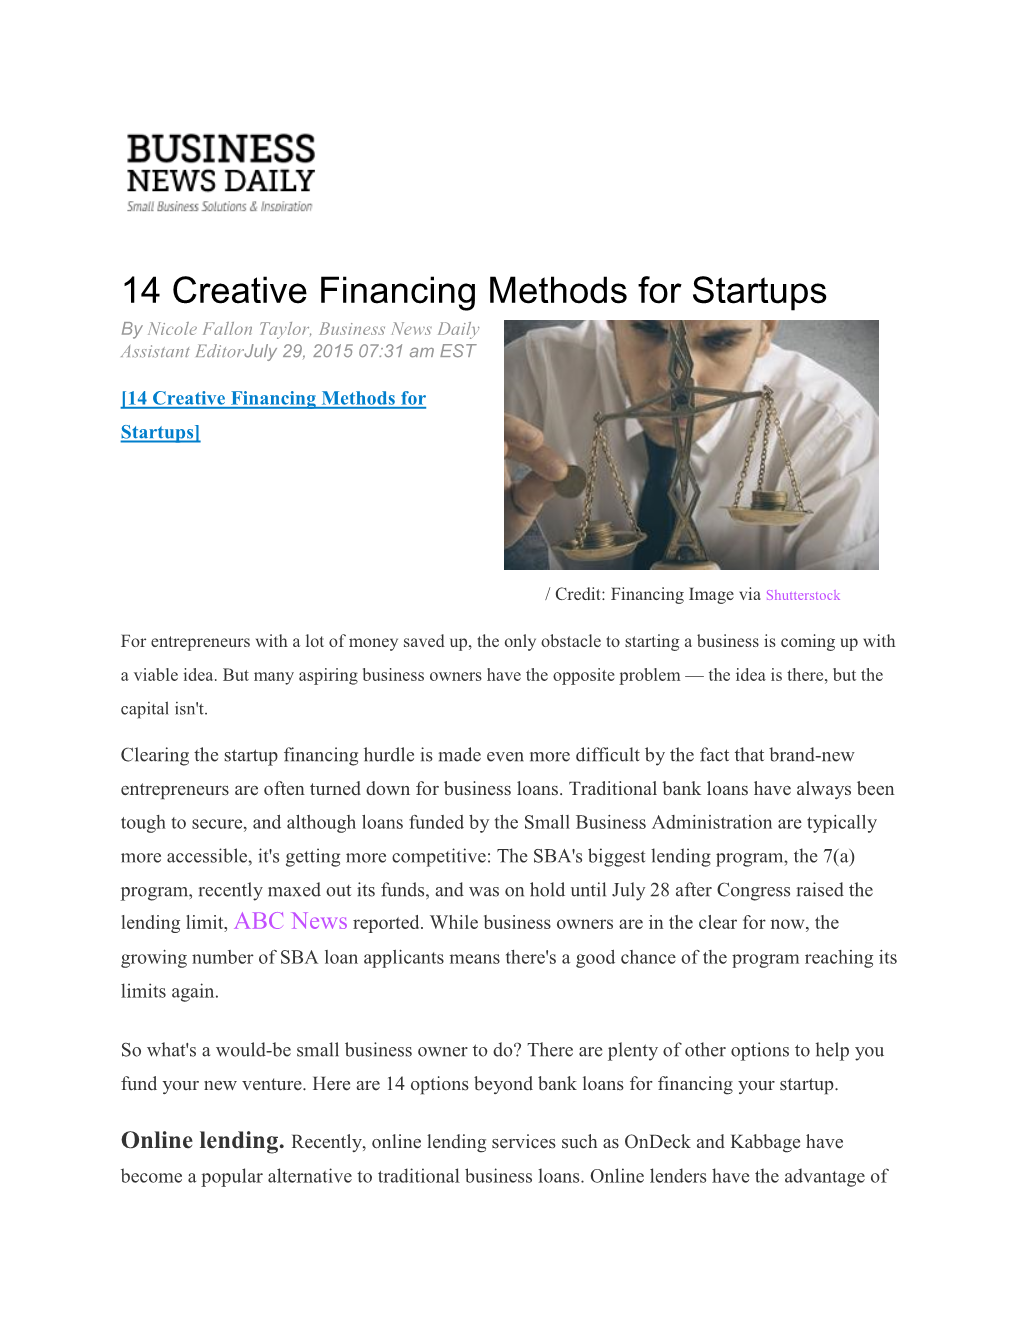 Creative Financing Methods for Startups by Nicole Fallon Taylor, Business News Daily Assistant Editorjuly 29, 2015 07:31 Am EST